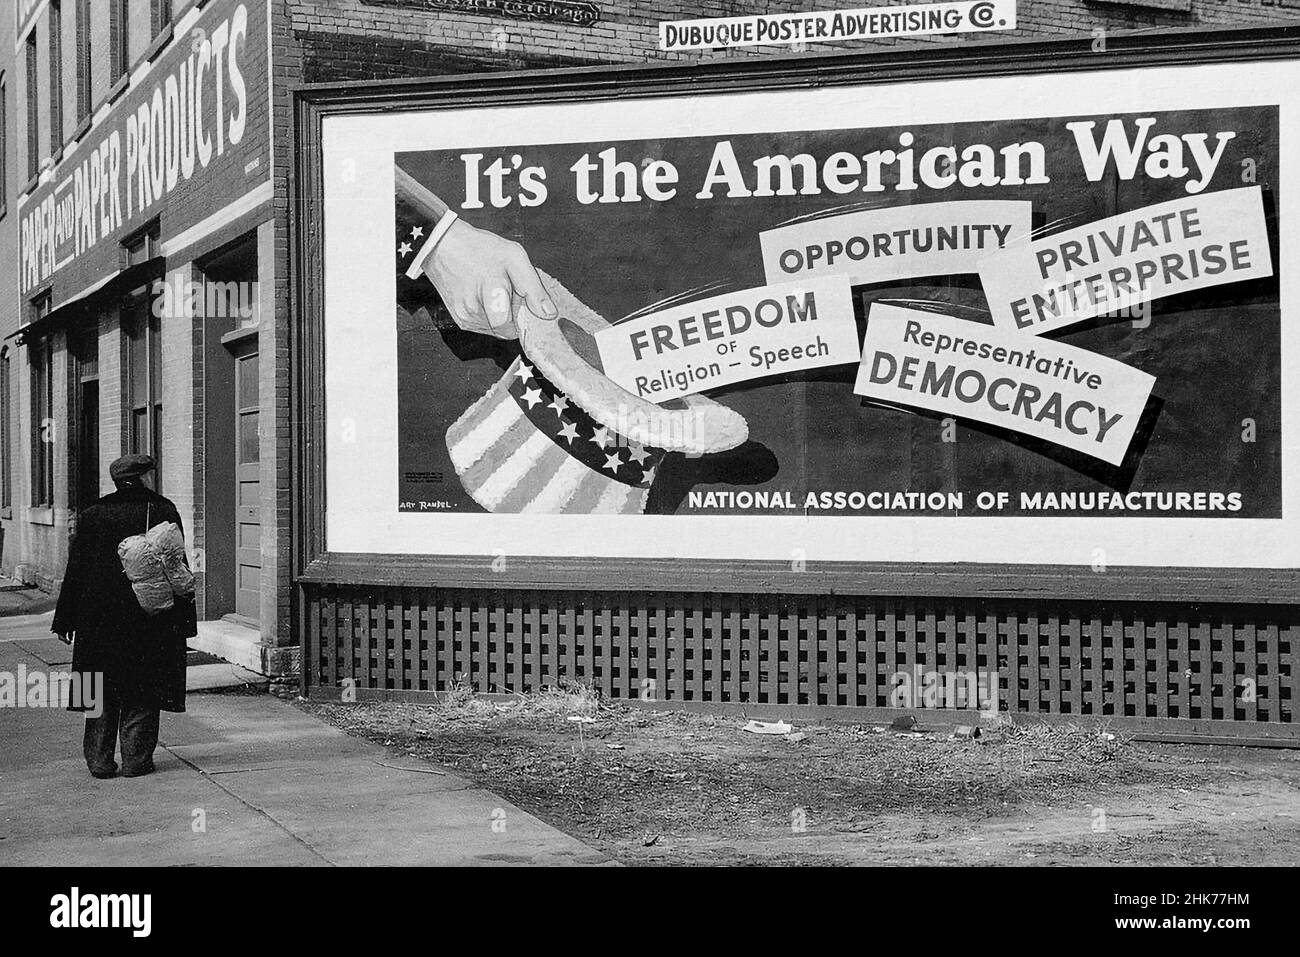 STILE DI VITA "AMERICAN WAY" CONTRASTA USA Rich & Poor Archive 1940s American Contrasts in Lifestyle 'ITS The American Way' National Association of Manufacturers signboard, con Down on His Luck man Passing in Dubuque, Iowa, USA aprile 1940 Foto Stock